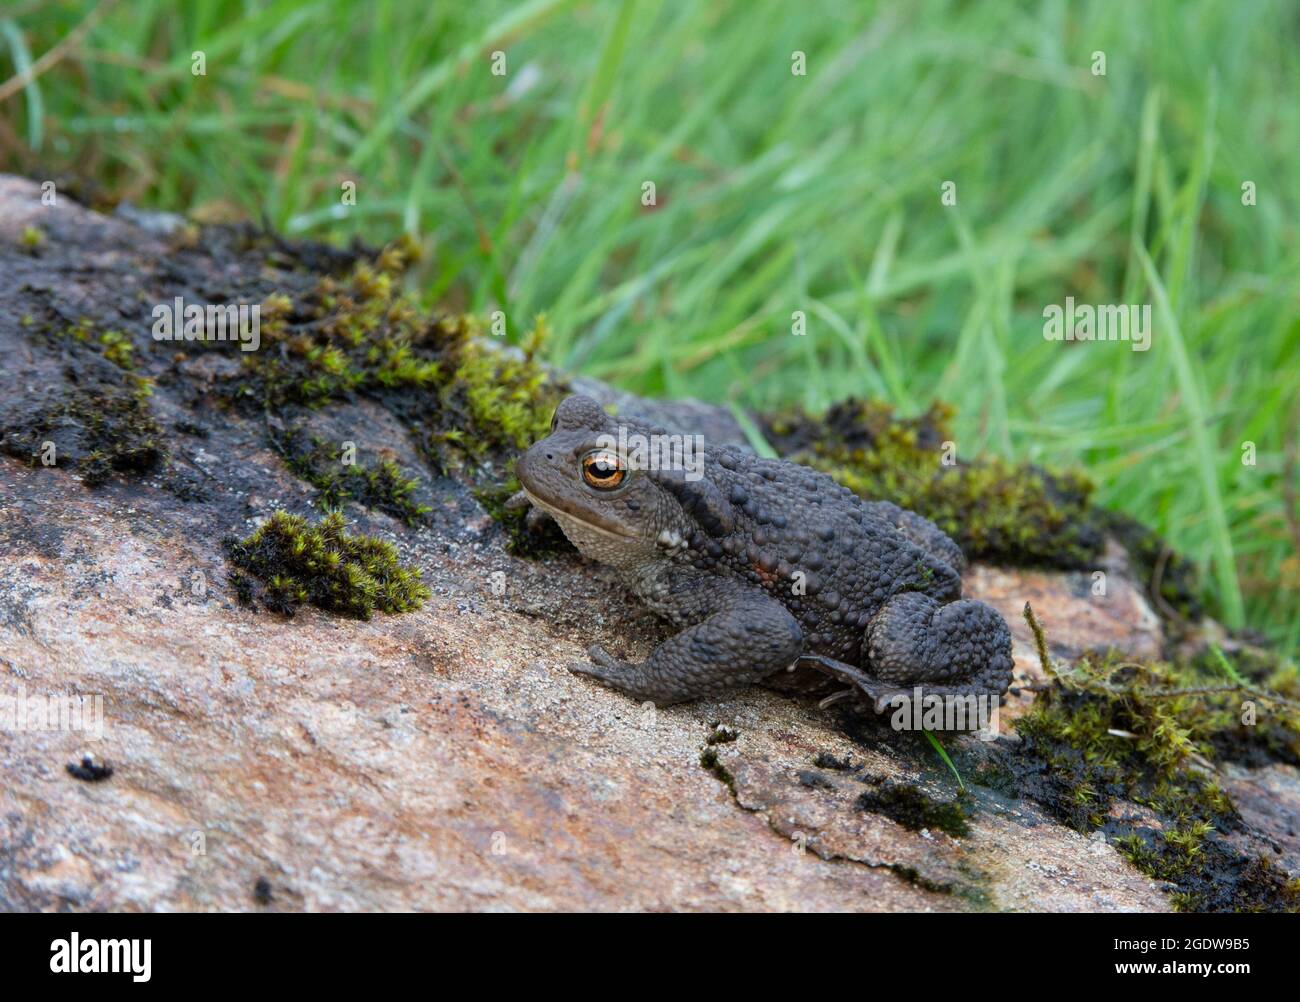 Common Toad on rock, Bufo bufo, beside Black Water River, Ross-shire, Highlands, Scotland, British Isles. Stock Photo